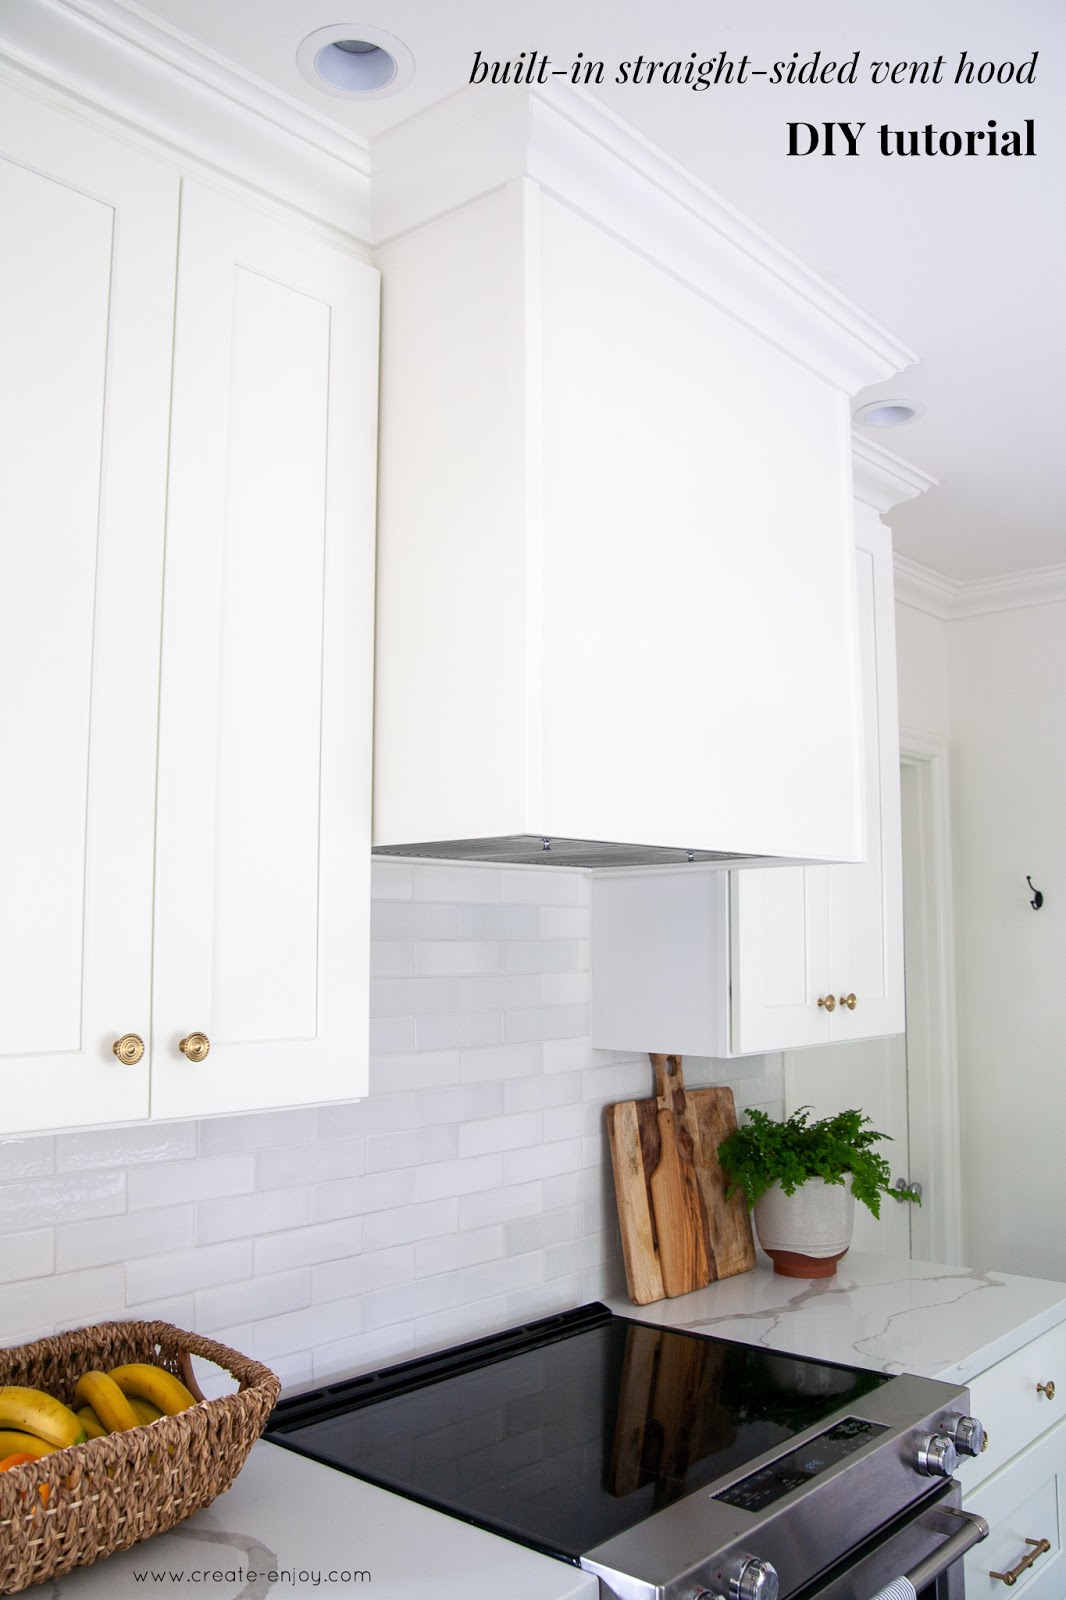 How To Install A Kitchen Exhaust Hood? - Tools for Kitchen & Bathroom